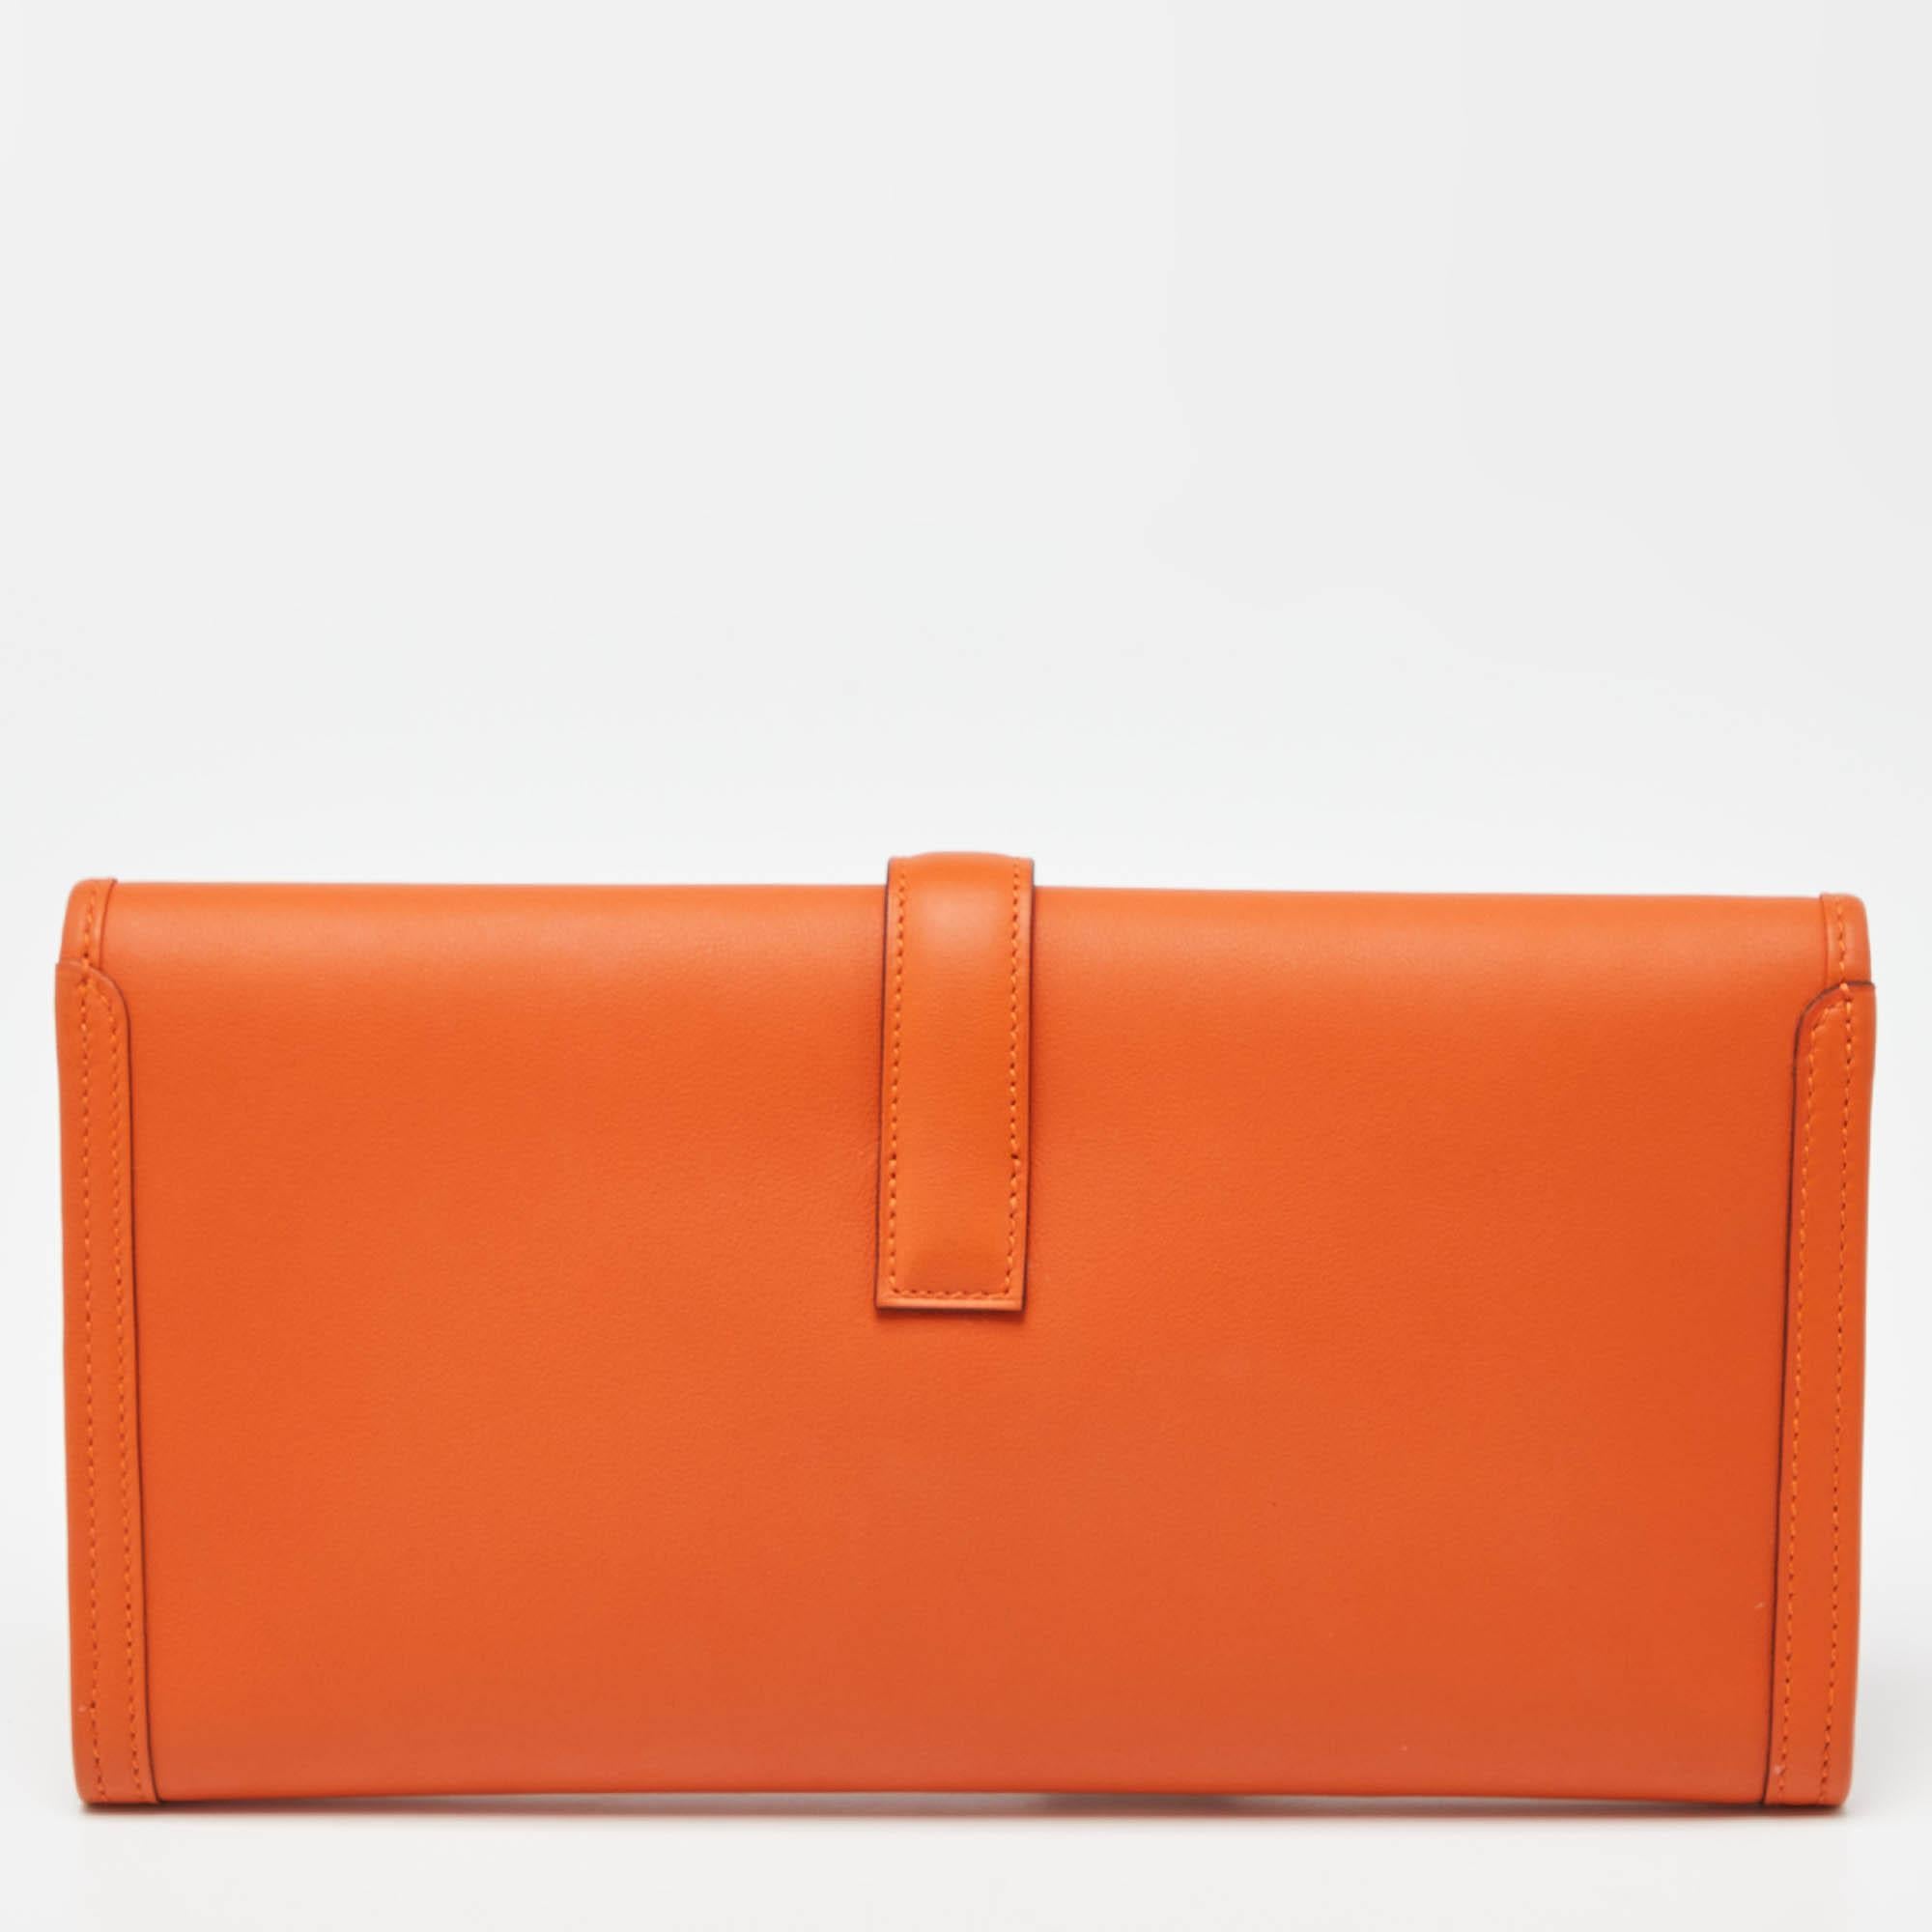 The Jige clutch by Hermès is a creation that is not only well-made but also coveted by women around the world. It is a design that is simple and sophisticated, just right for the woman who embodies class in a modern way. Meticulously crafted from